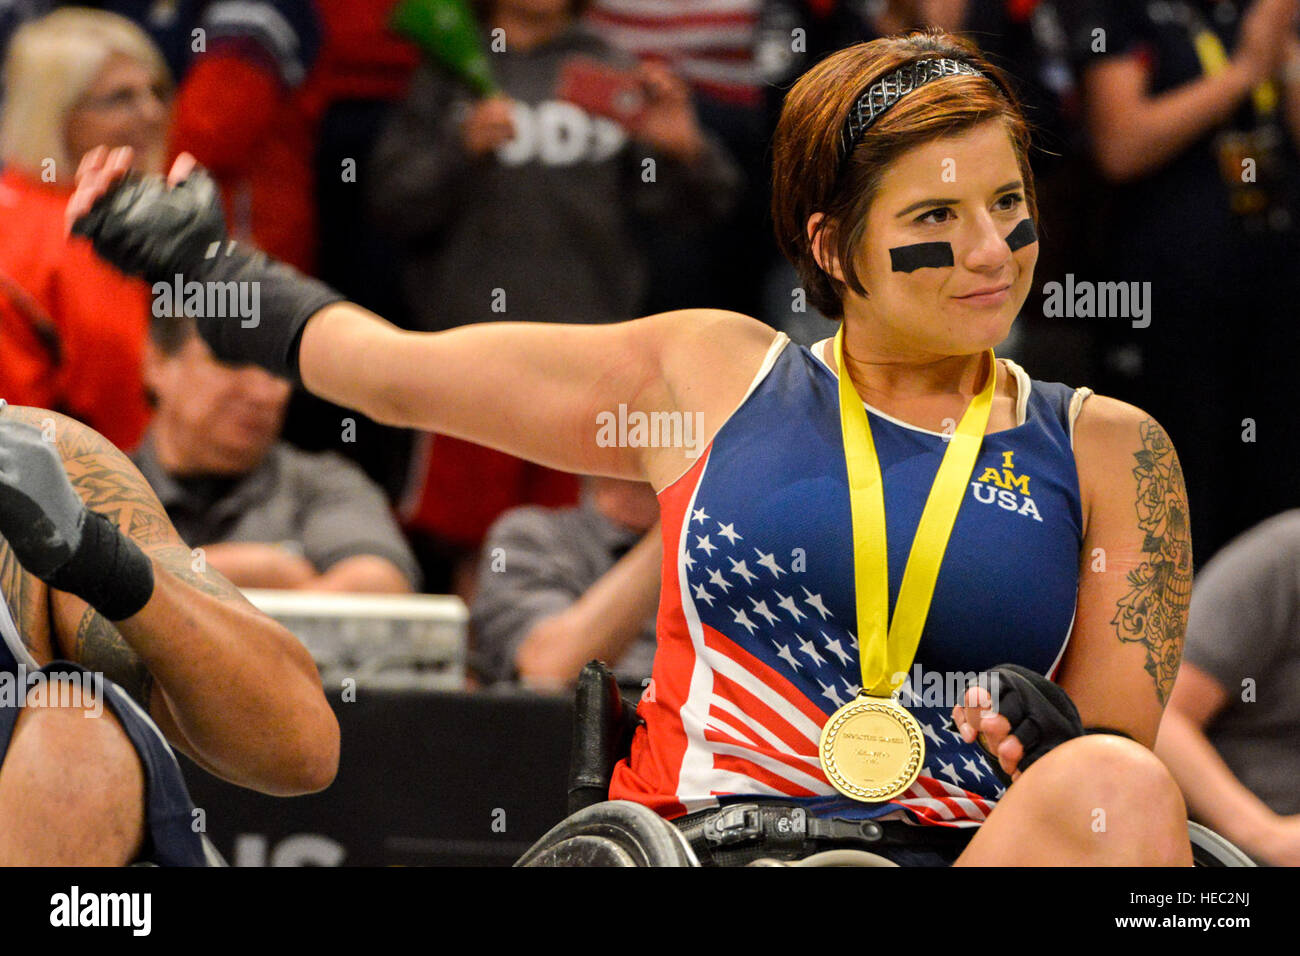 160511-F-WU507-108: Air Force Staff Sgt. Sebastiana Lopez-Arellano, Team US, stretches and smiles after U.S. Vice President Joe Biden presents her a gold metal, for winning the US versus Denmark wheel chair basketball gold metal match at the 2016 Invictus Games, at the ESPN Wide World of Sports complex at Walt Disney World, Orlando, Fla., May 11, 2016. The US beat Denmark 28-19, and took gold; Denmark took silver and the bronze went to the UK, who beat Australia 47-4. (U.S. Air Force photo by Senior Master Sgt. Kevin Wallace/RELEASED) Stock Photo